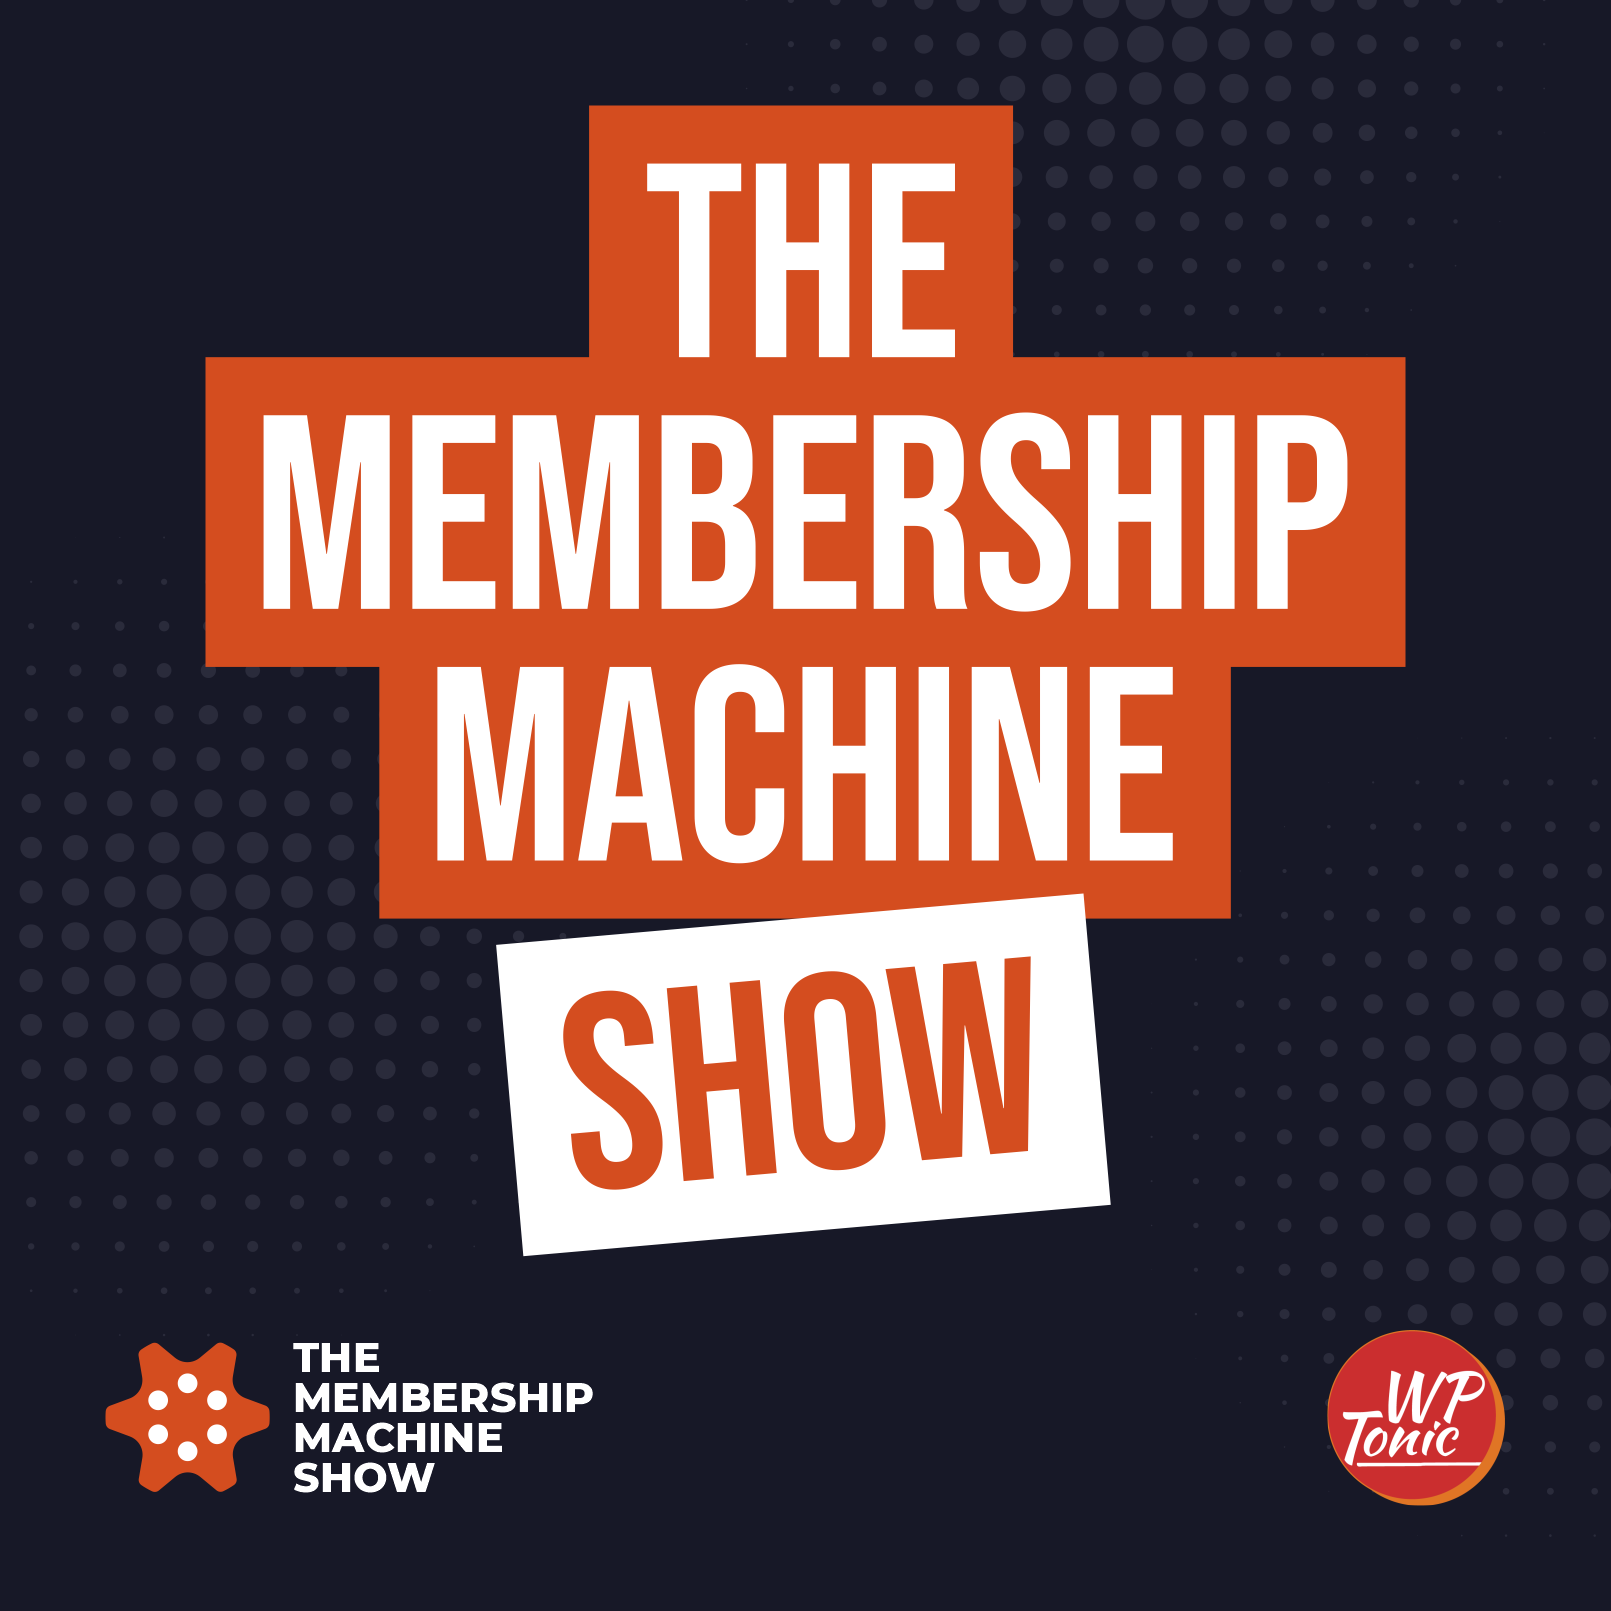 12 - The Membership Machine Show - Do You Want to Translate Your WordPress Membership Website into Multiple Languages?